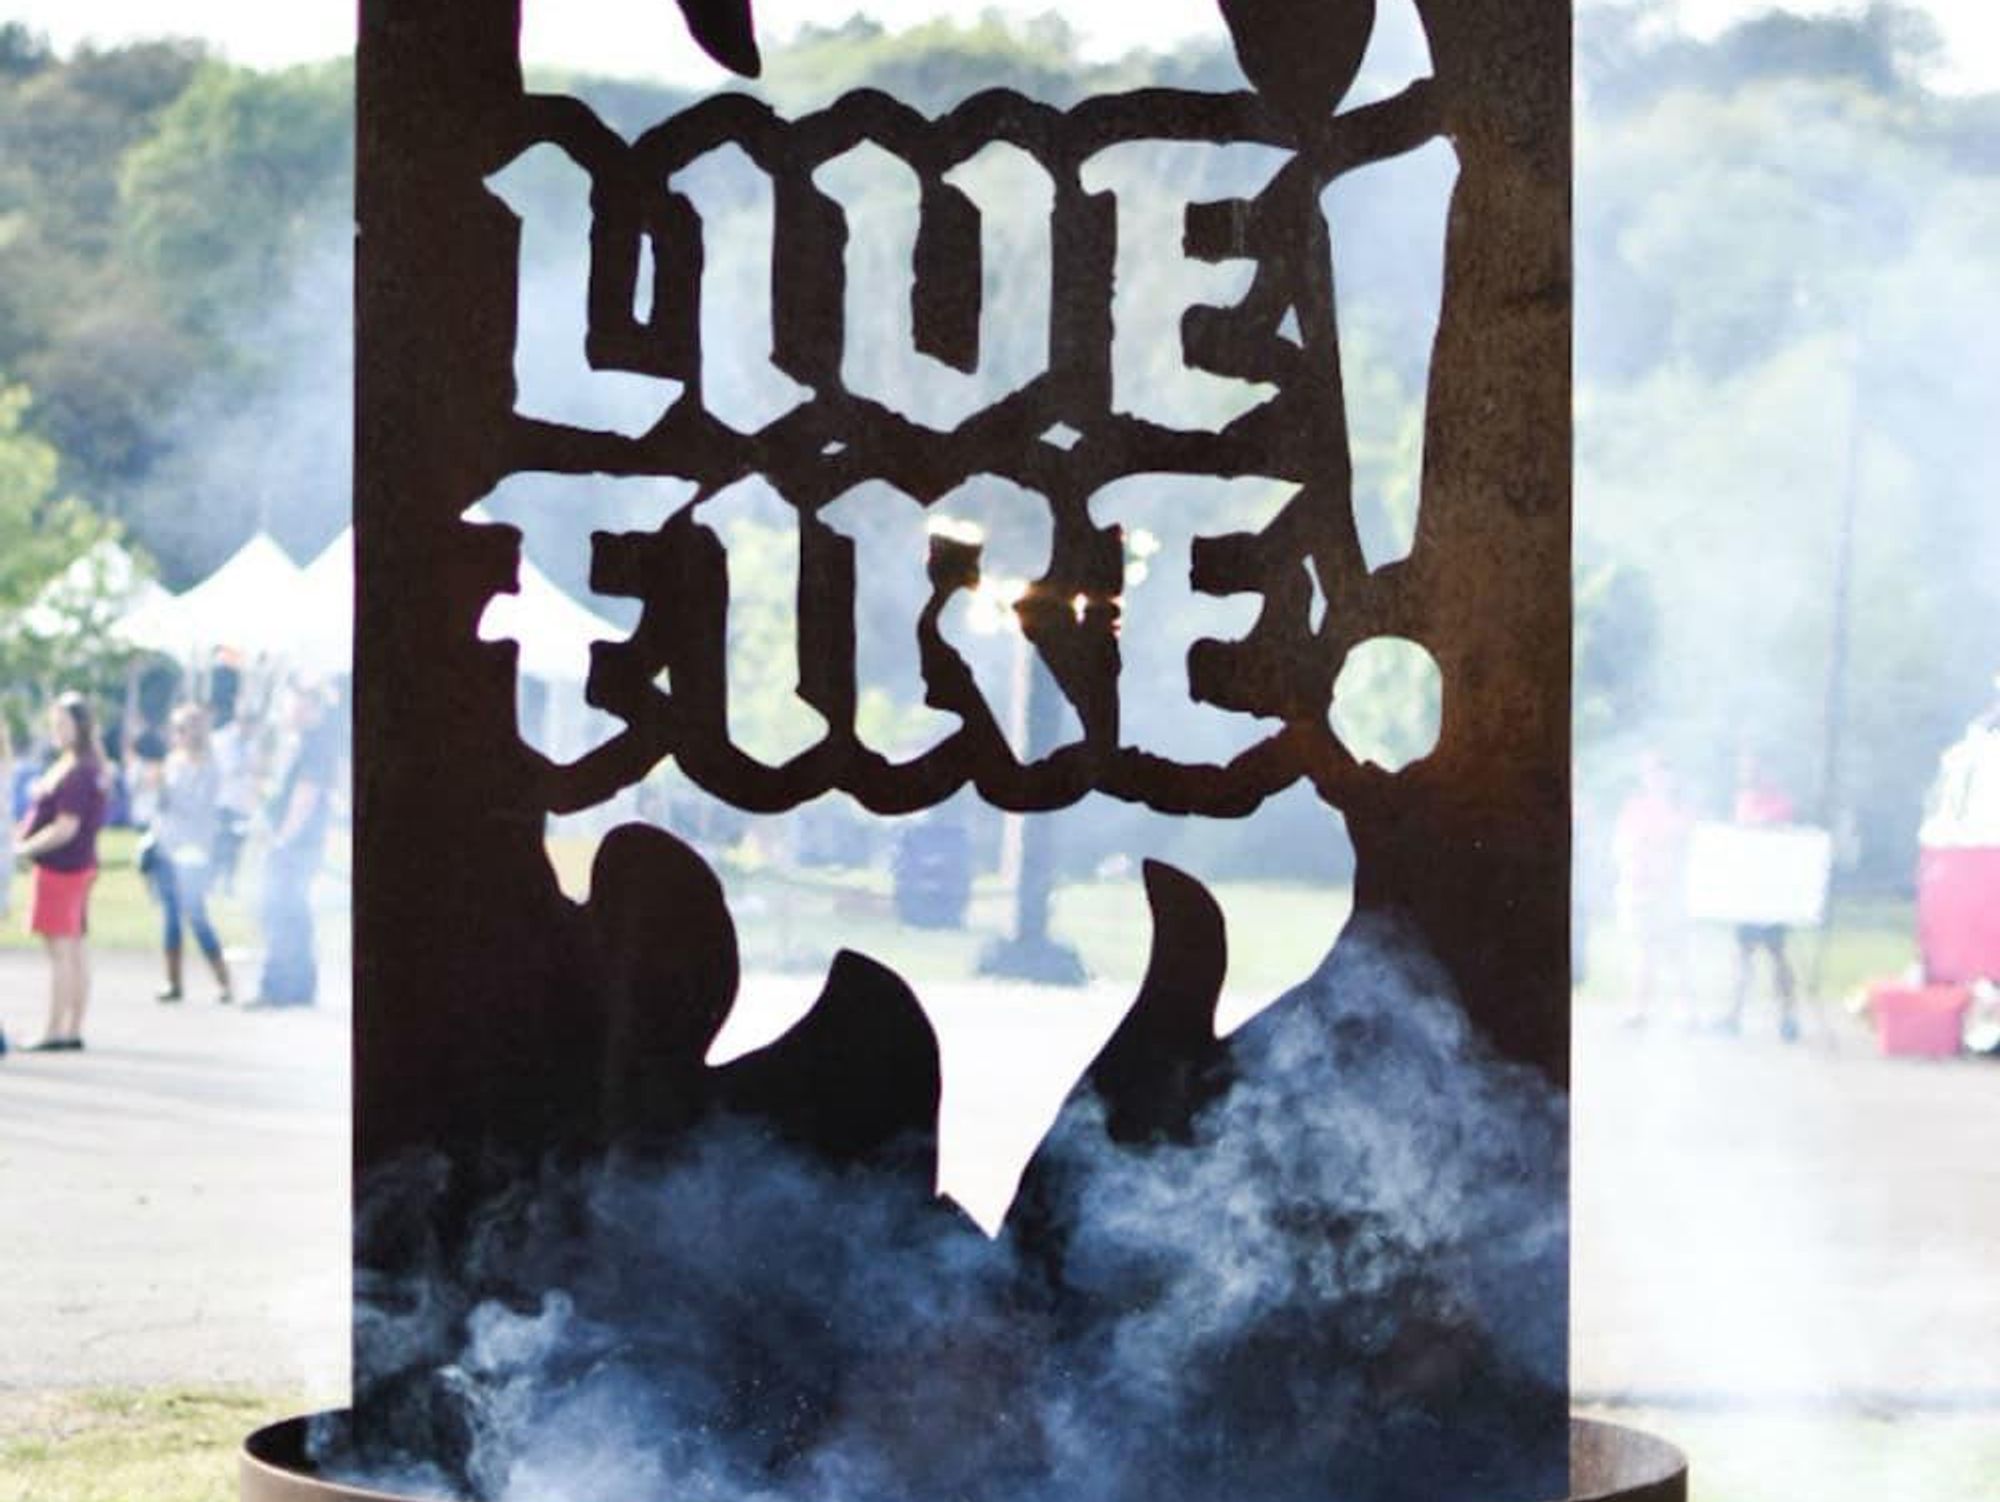 Live Fire! is heating up Austin this spring.